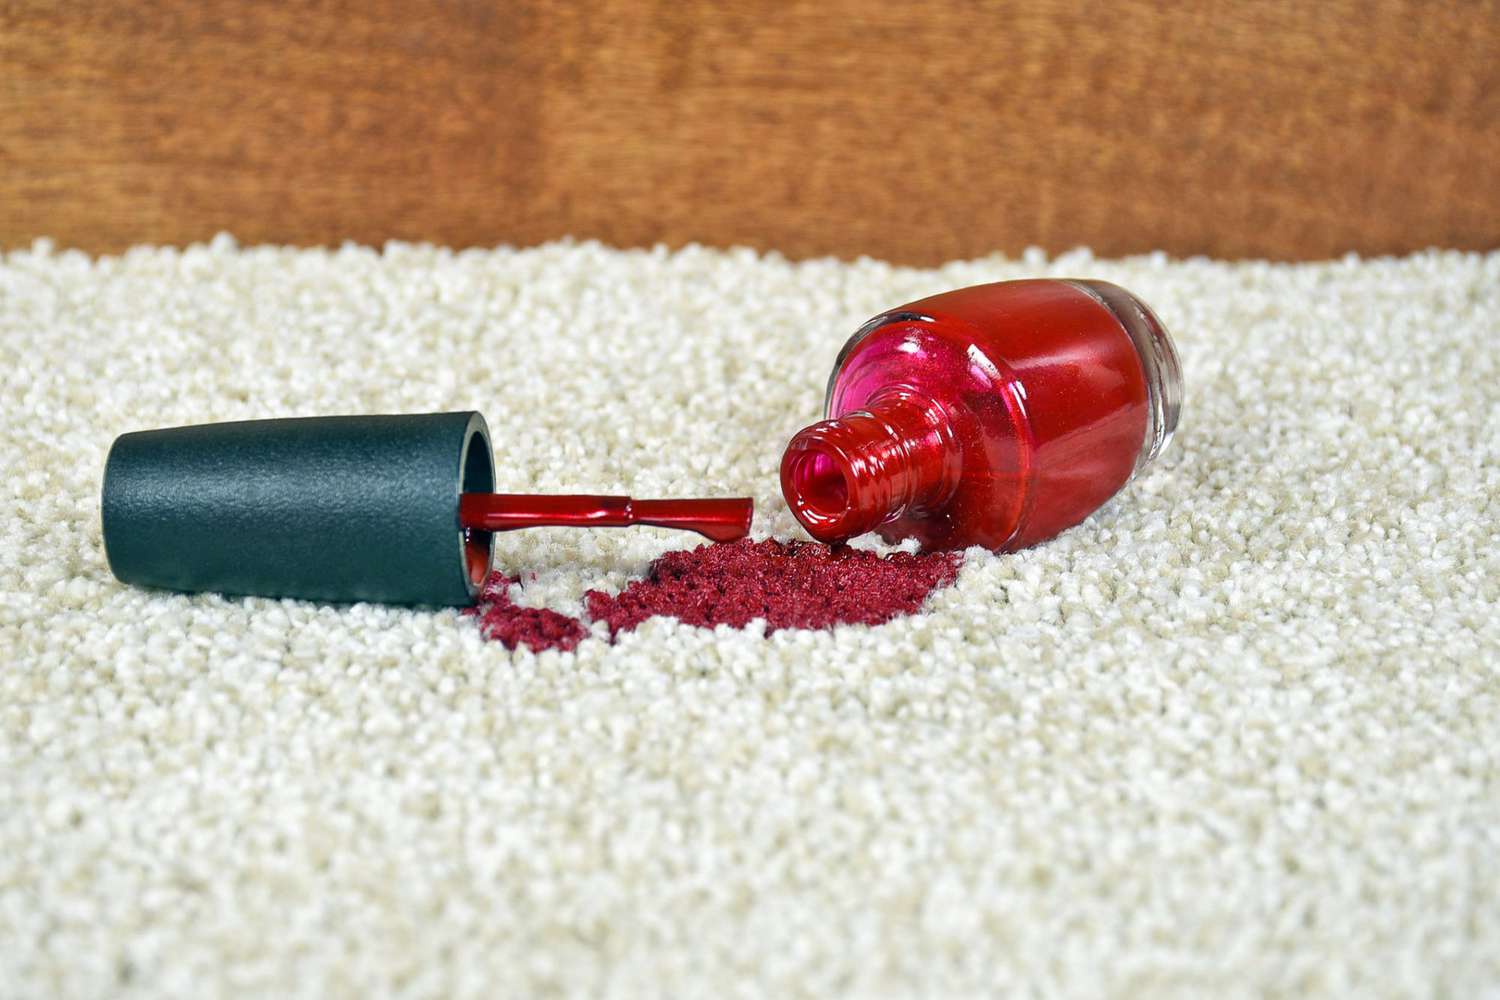 How To Get Out Nail Polish From Rug